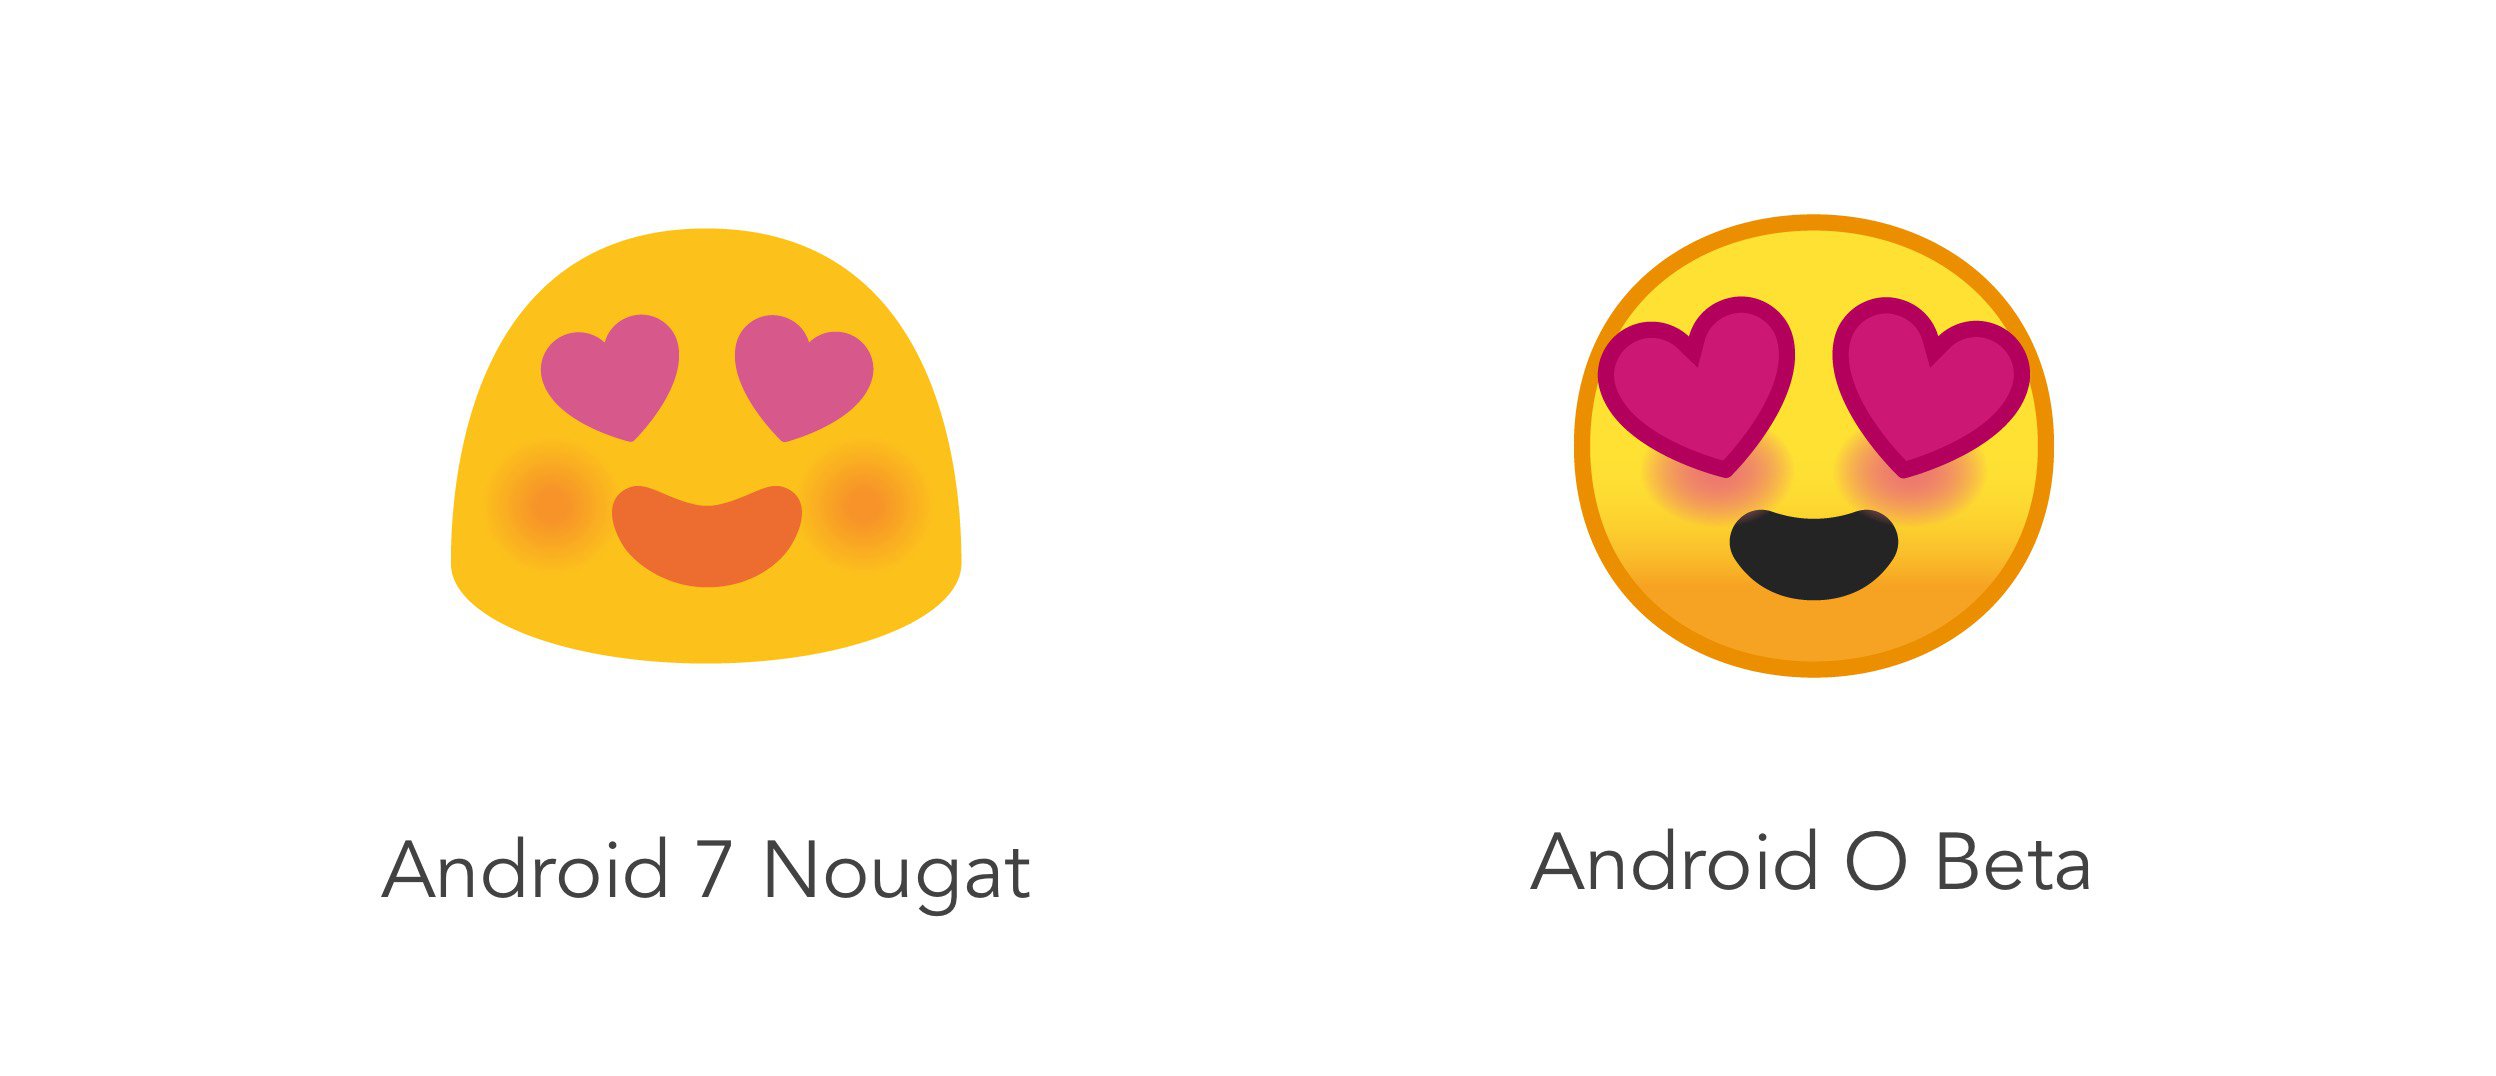 google finally replaces gumdrop blob emojis with circular ones in android o 515833 4